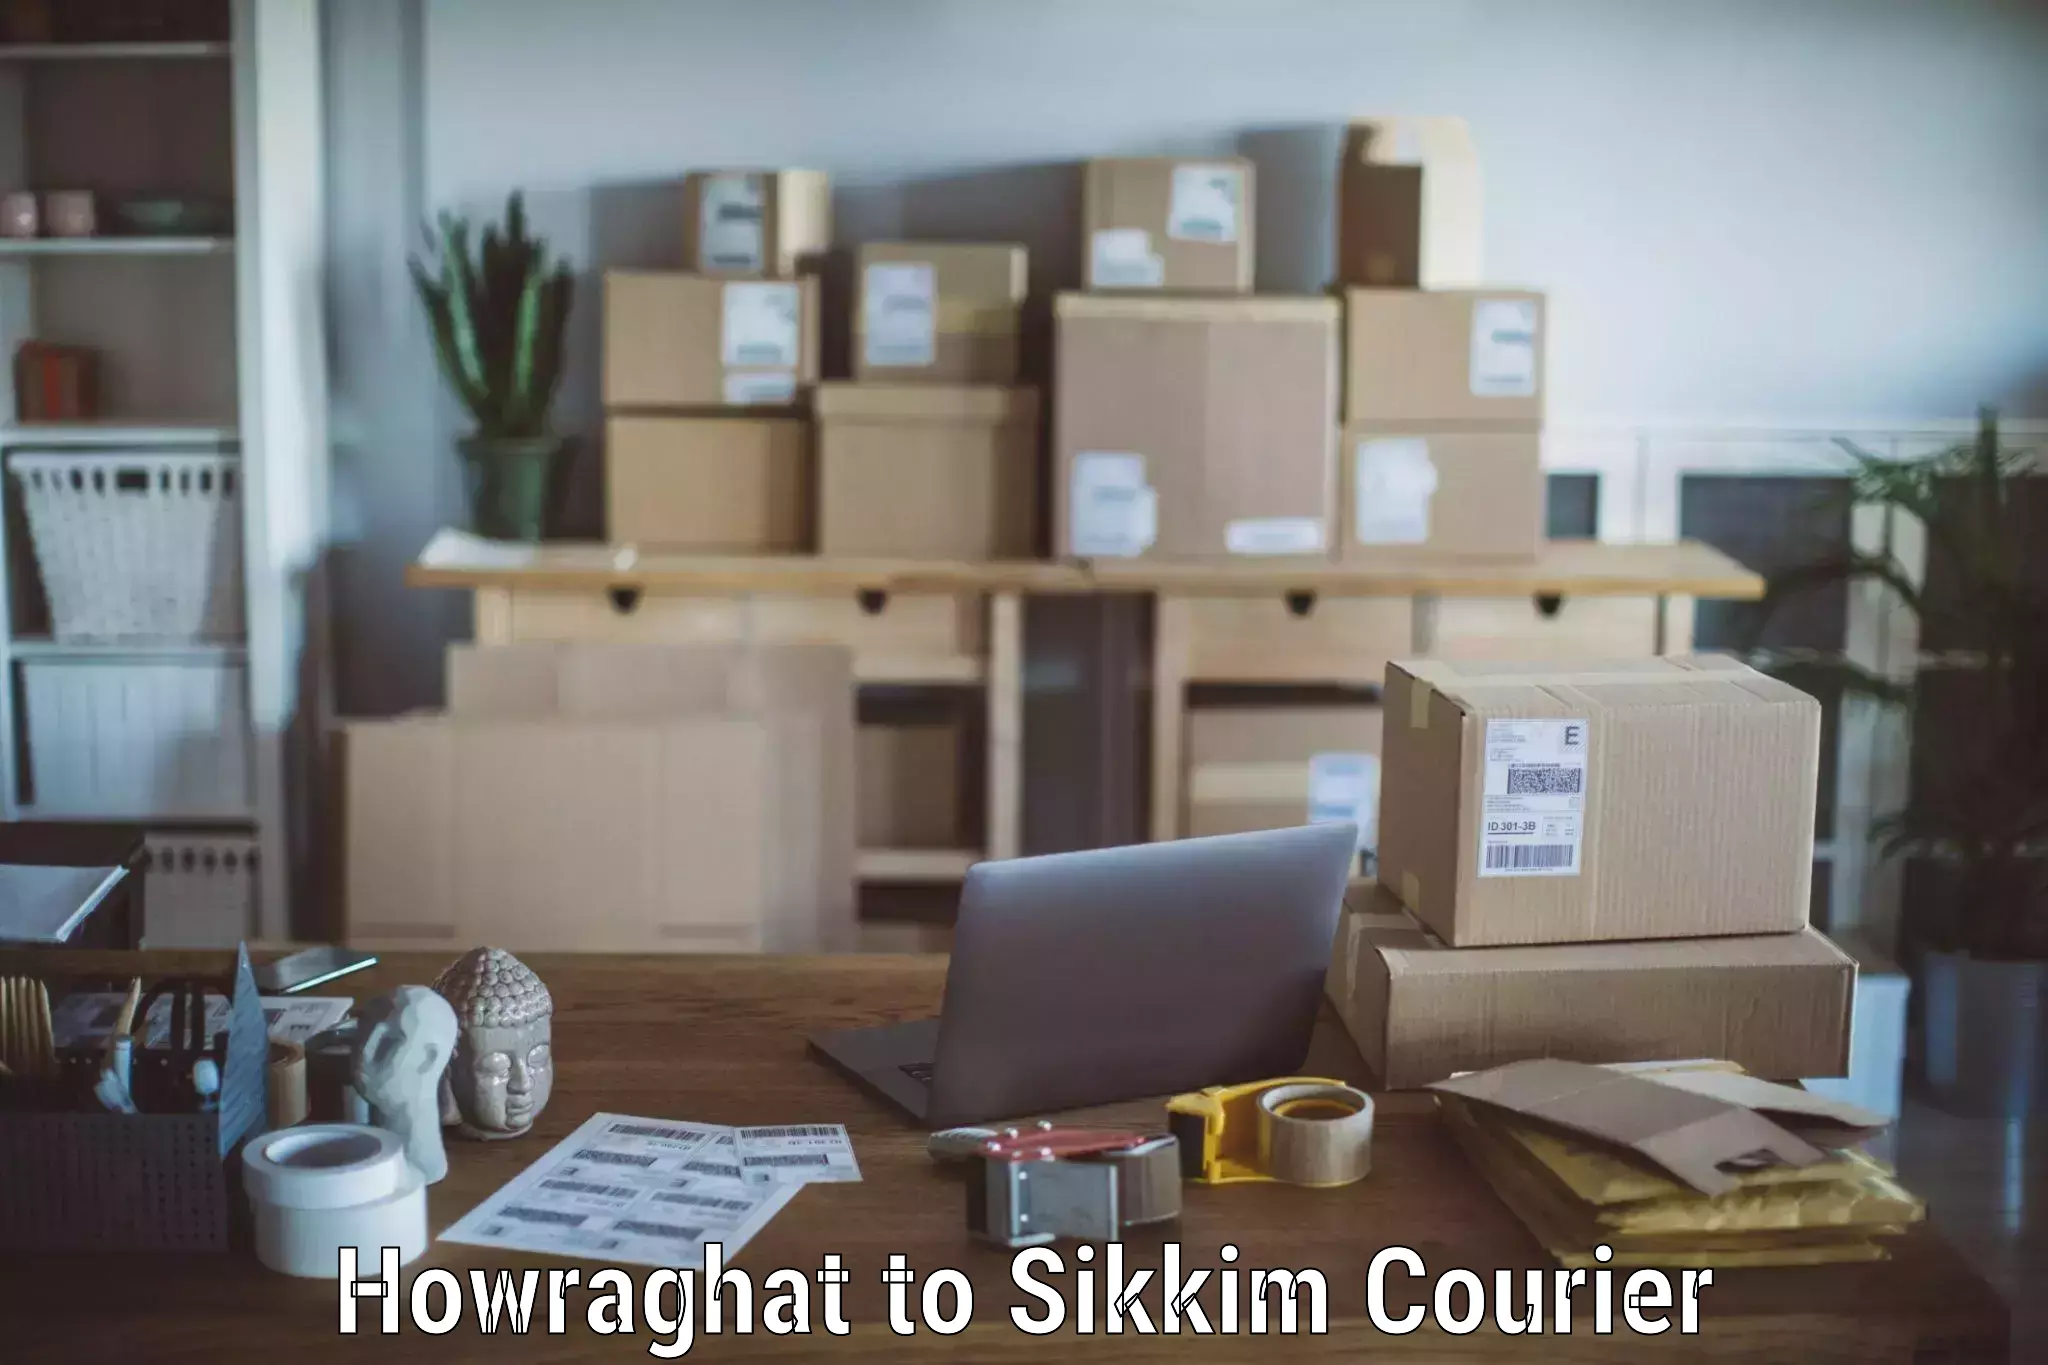 Professional moving company Howraghat to Gangtok